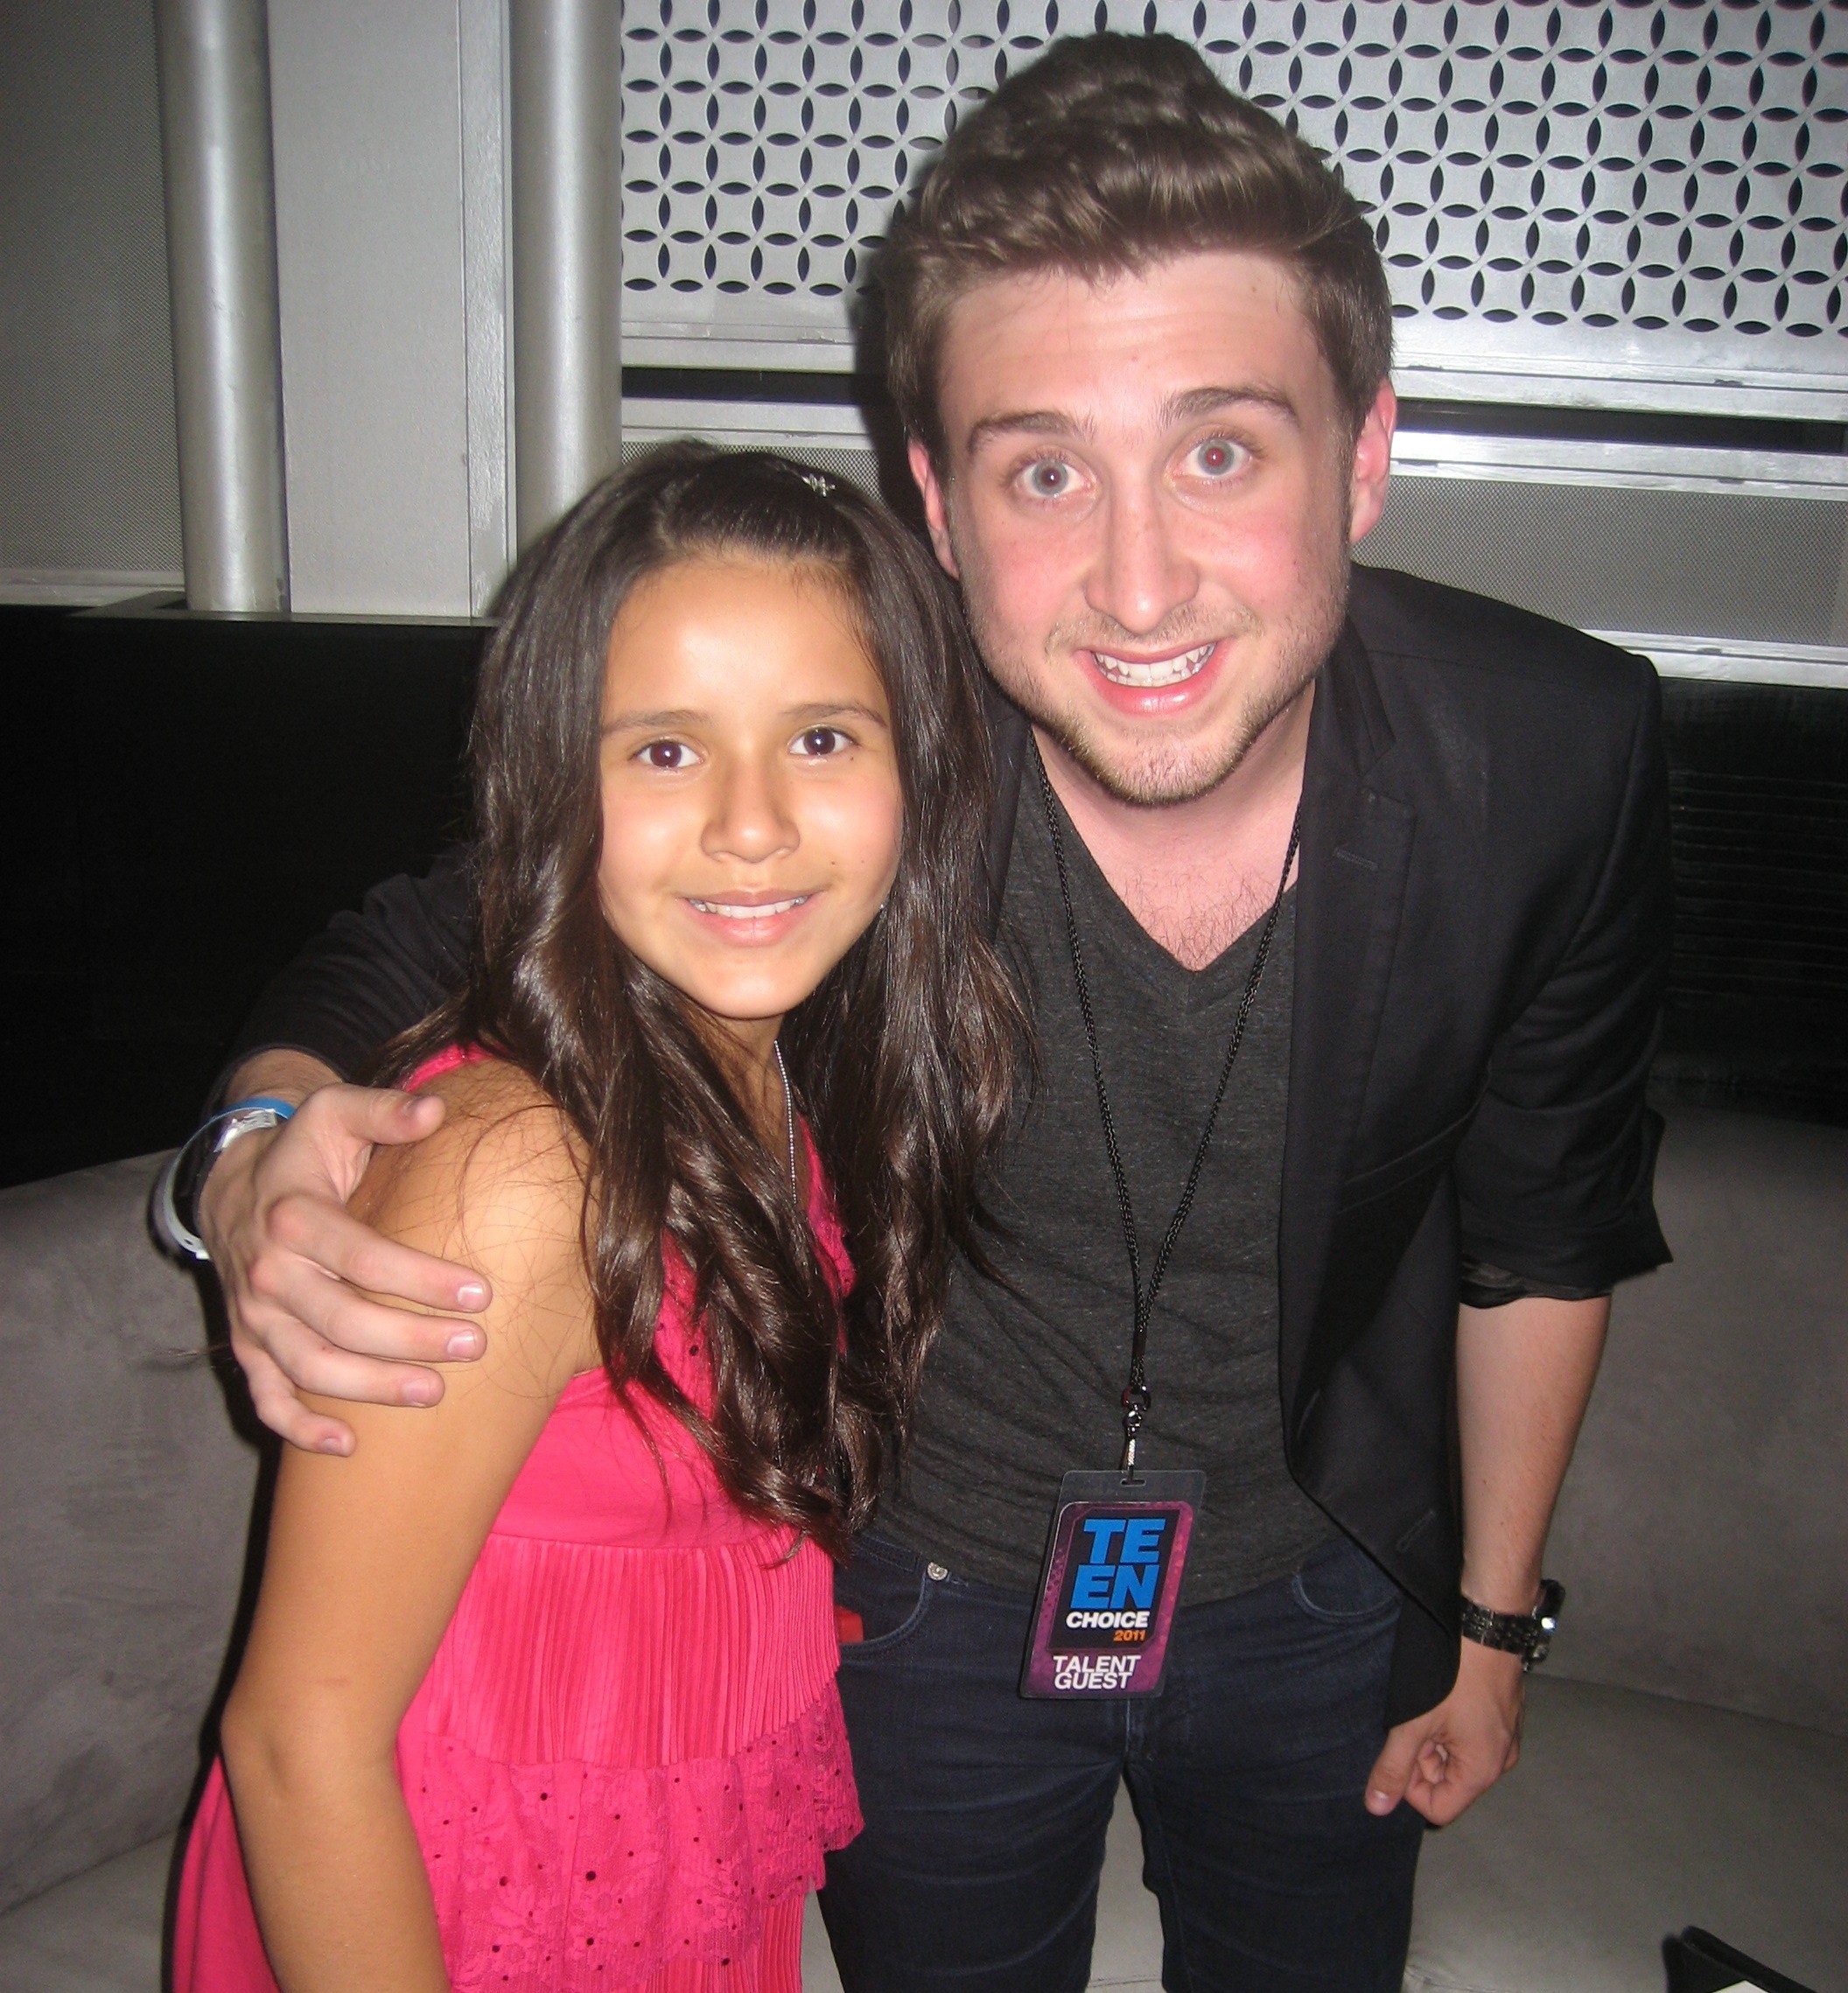 Heaven Marie with Kyle Kaplan @ Teen Choice awards after party